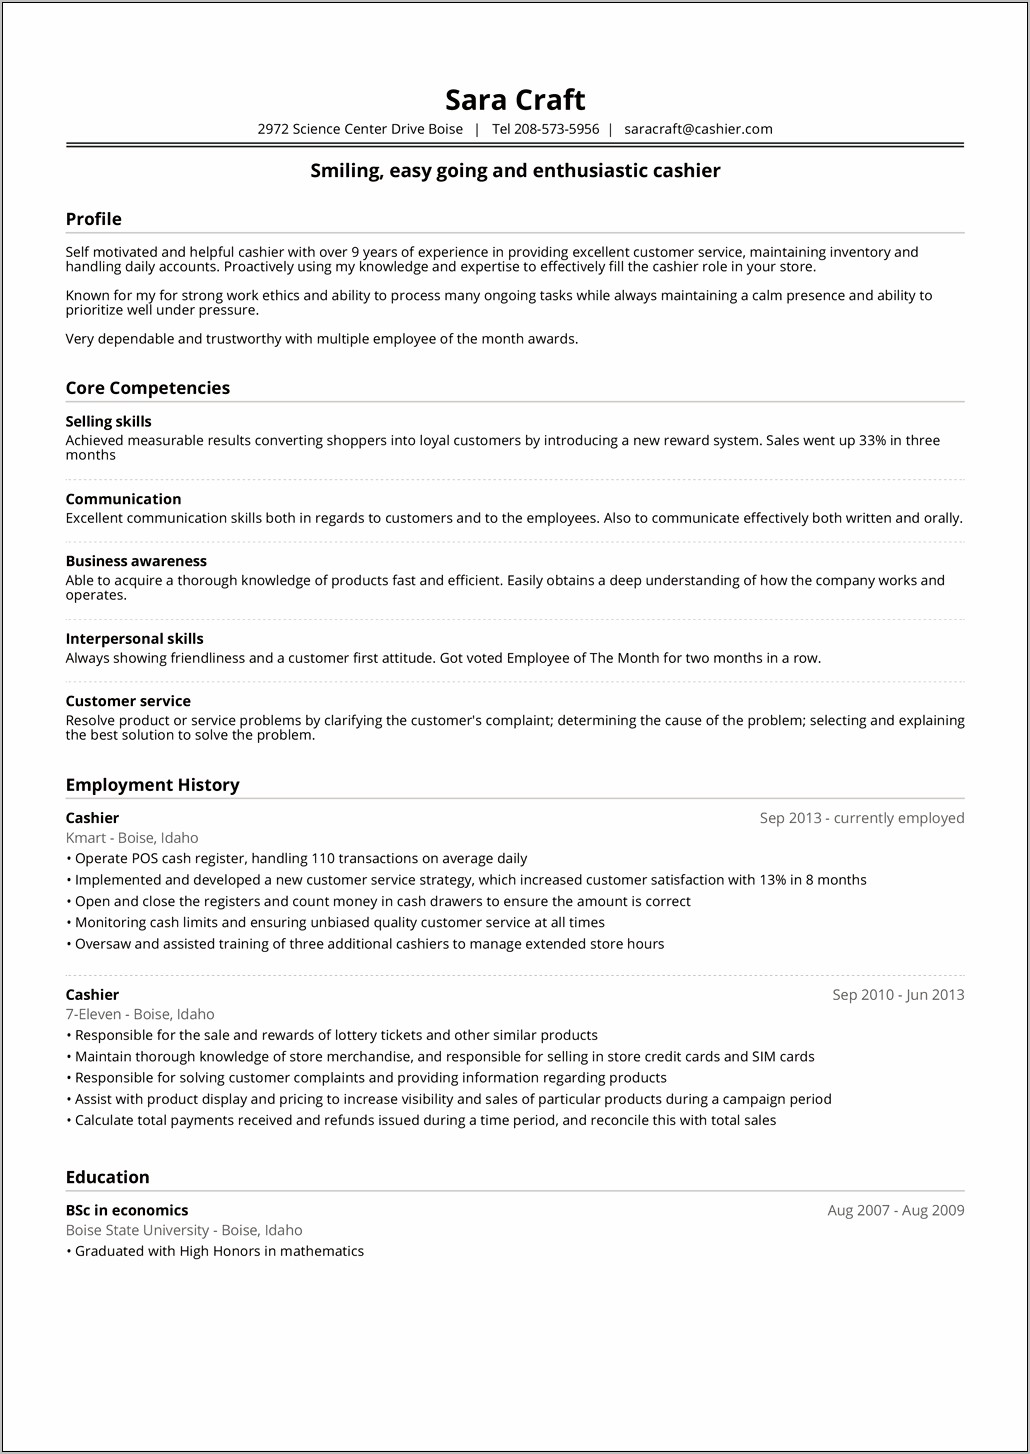 Key Skills And Competencies For Resume